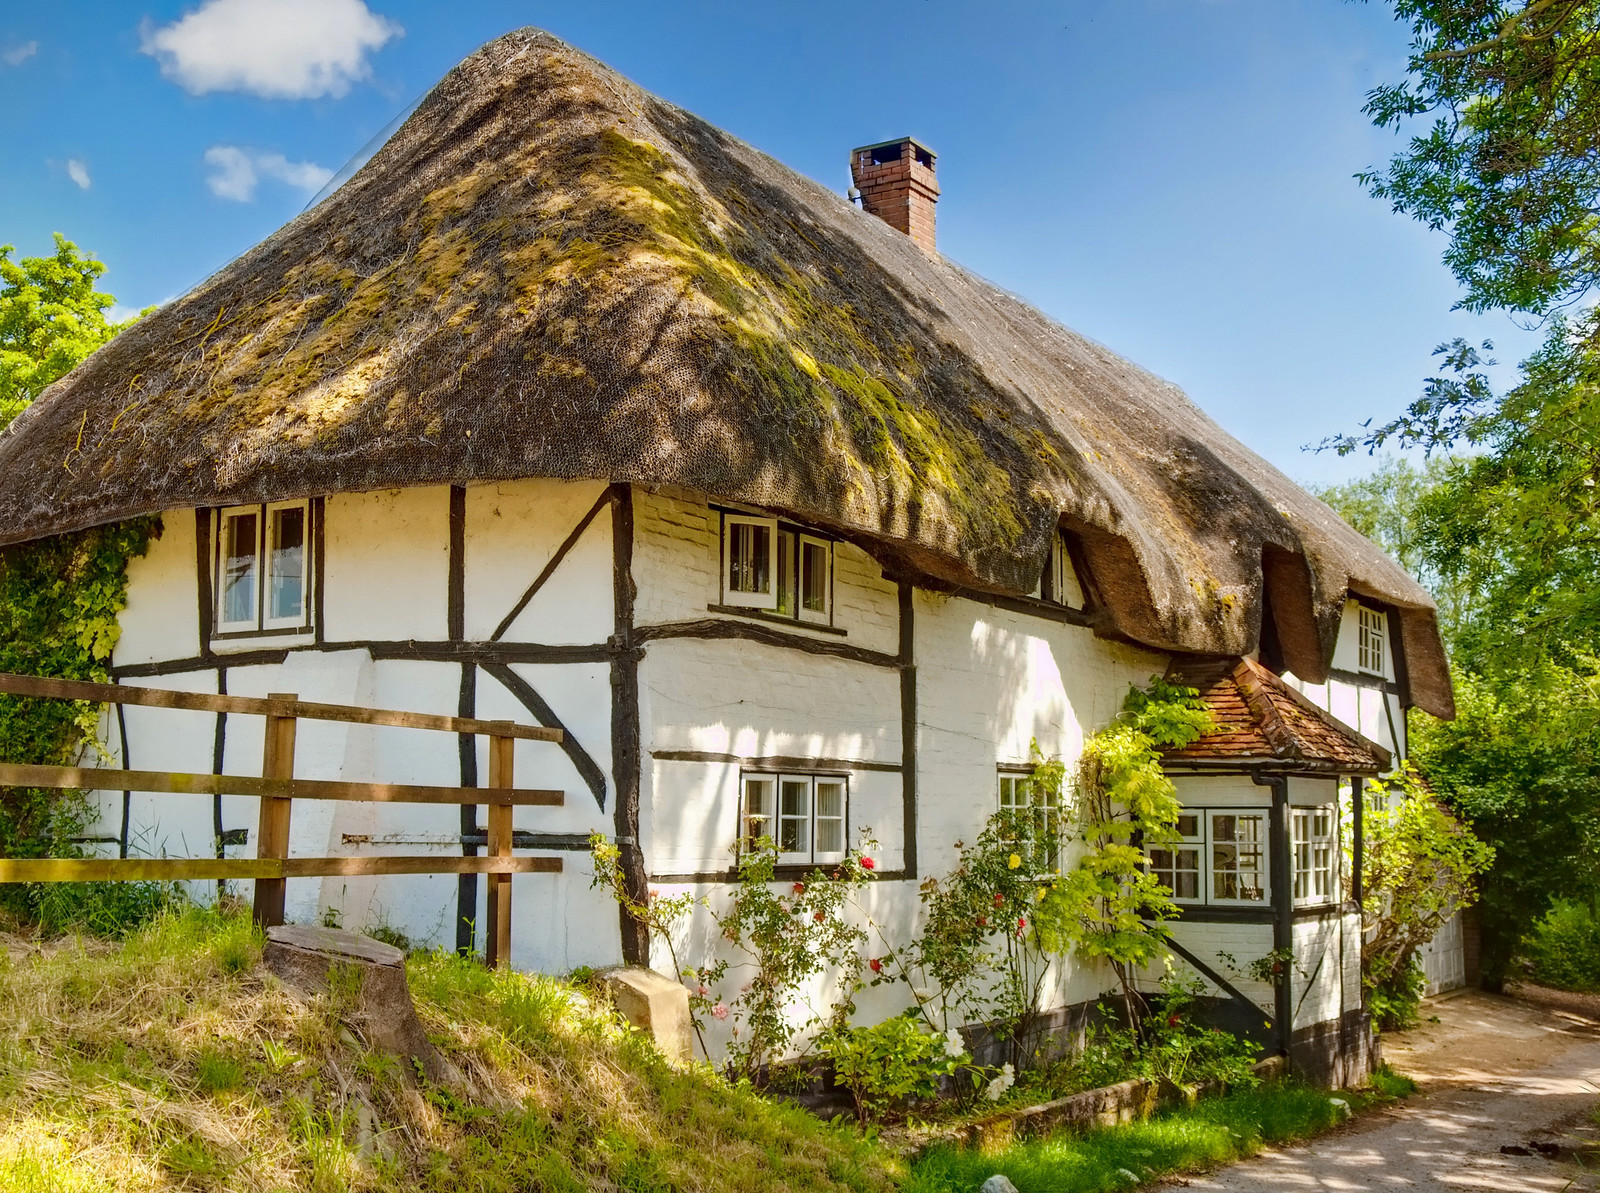 A thatched cottage in Nether Wallop, Hampshire. Credit Anguskirk